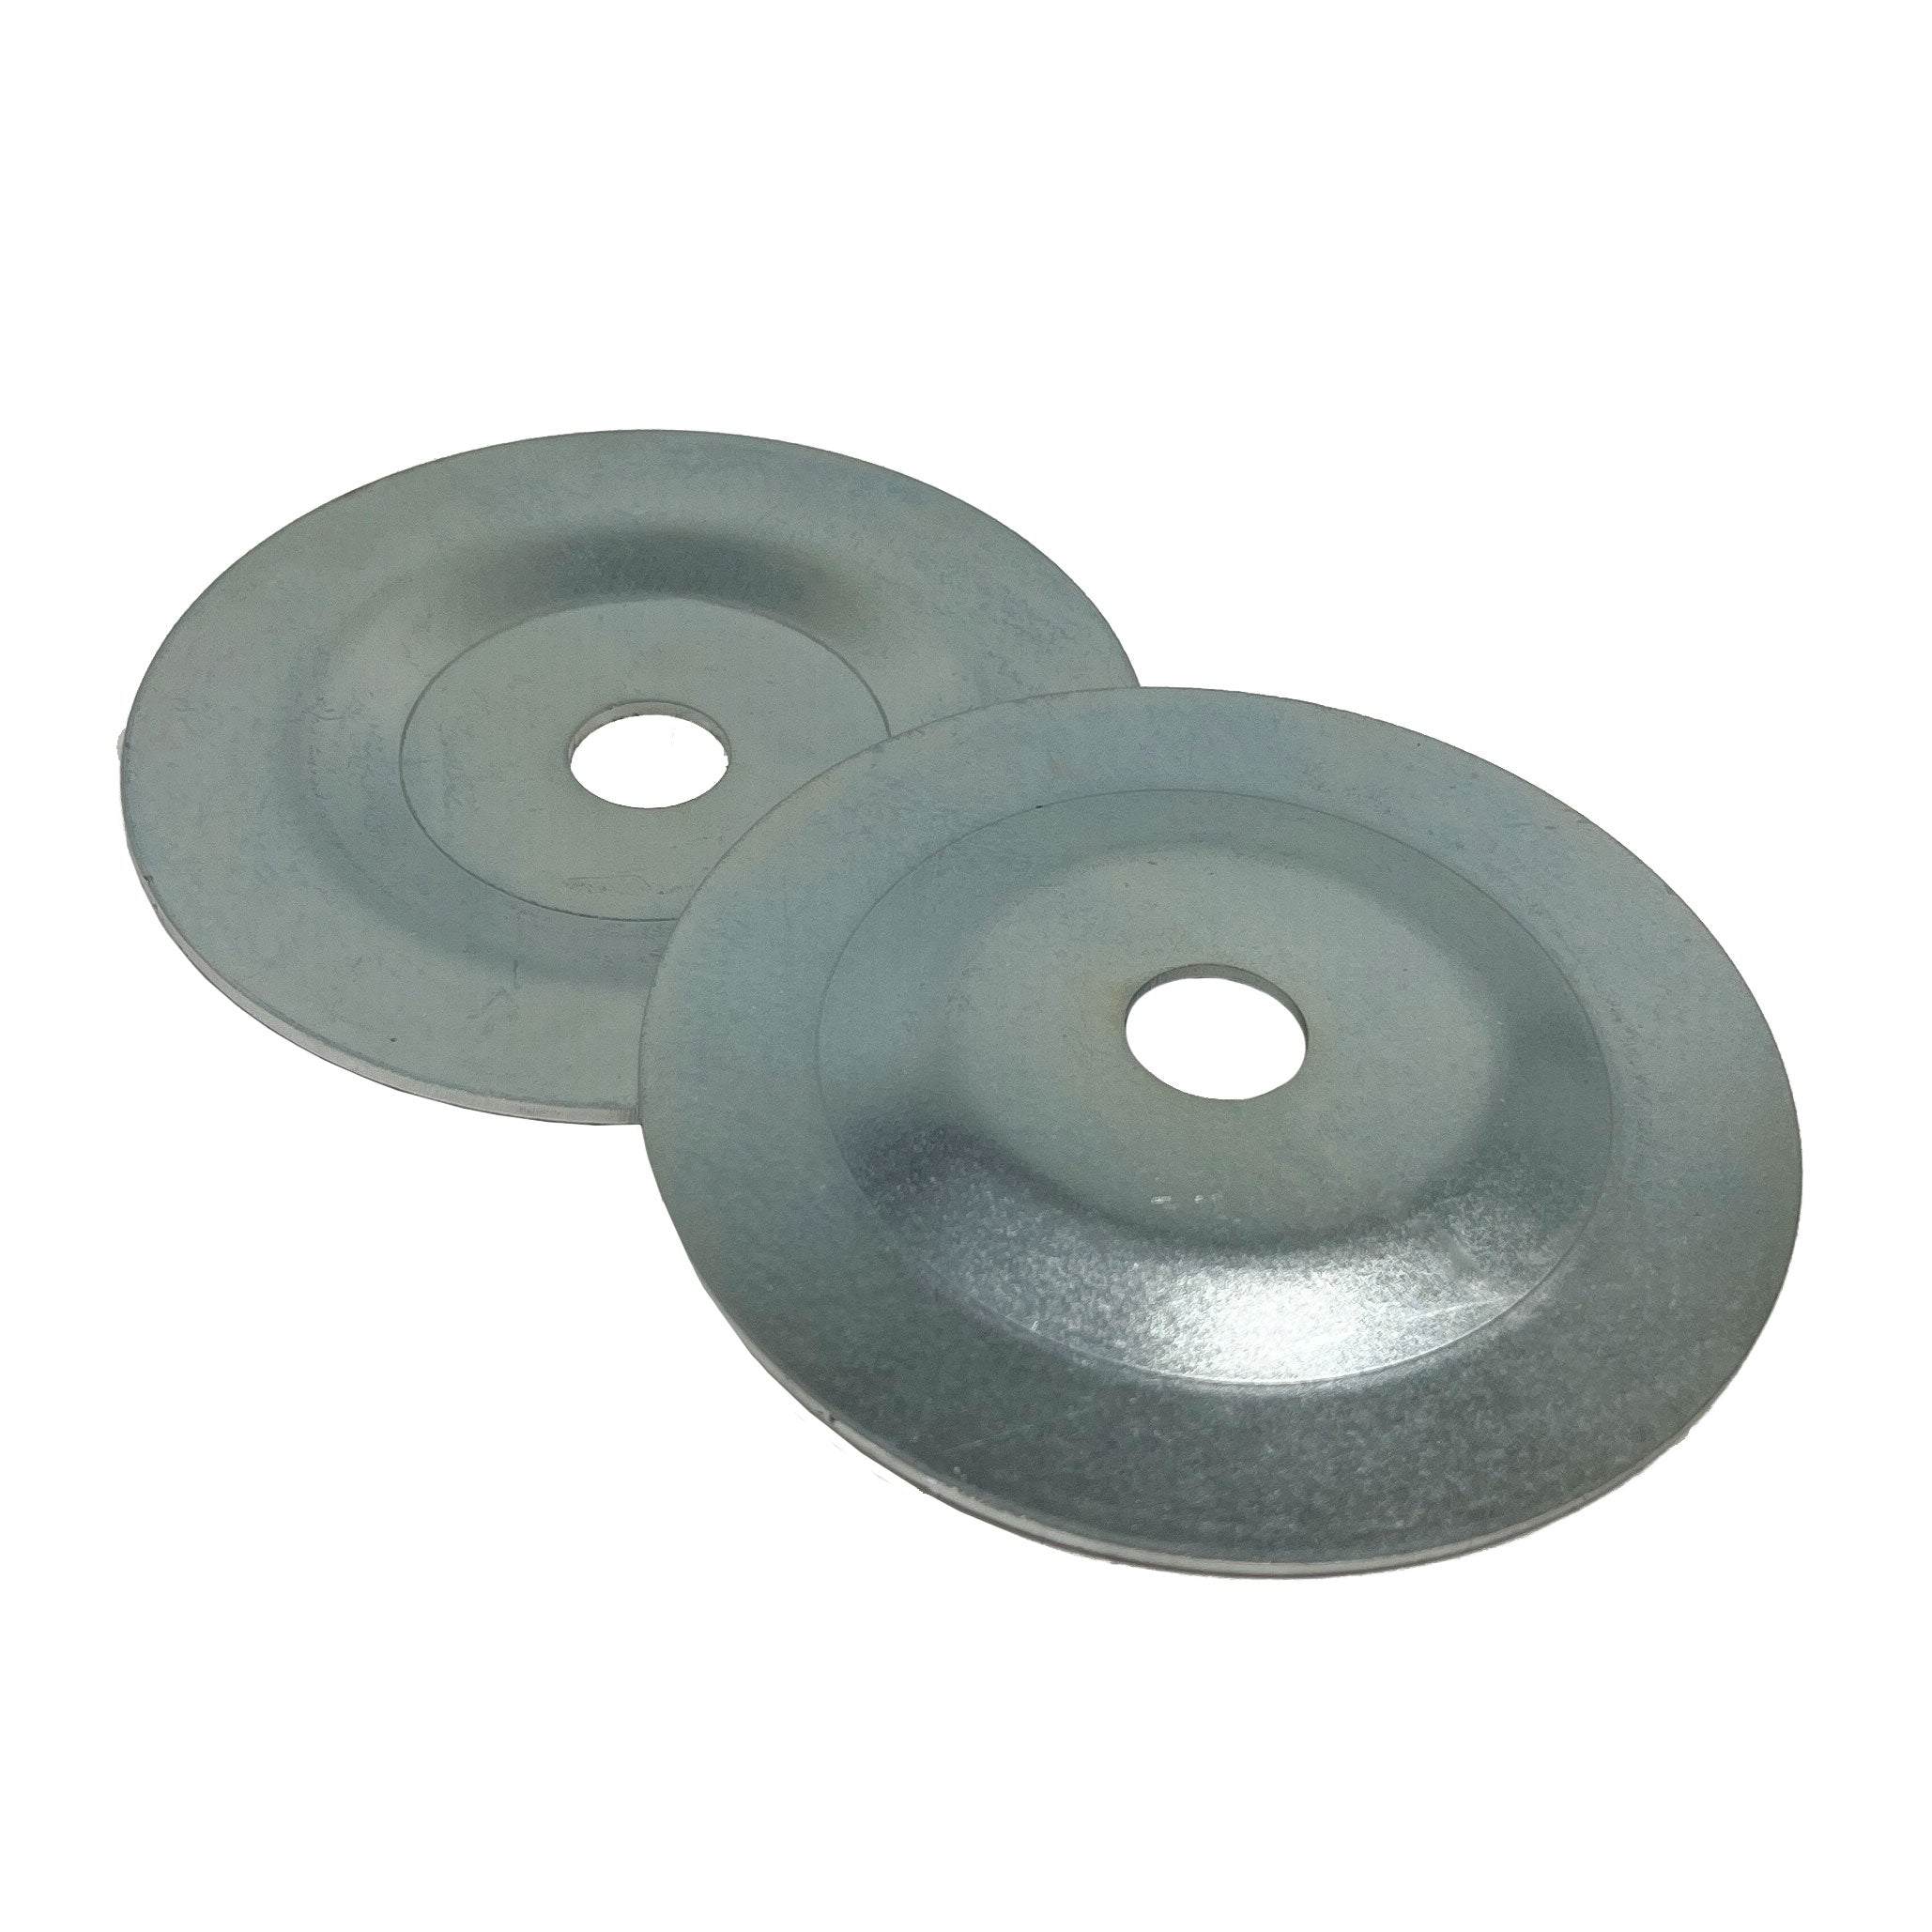 Metal Polishing Compound for Buffing Wheels